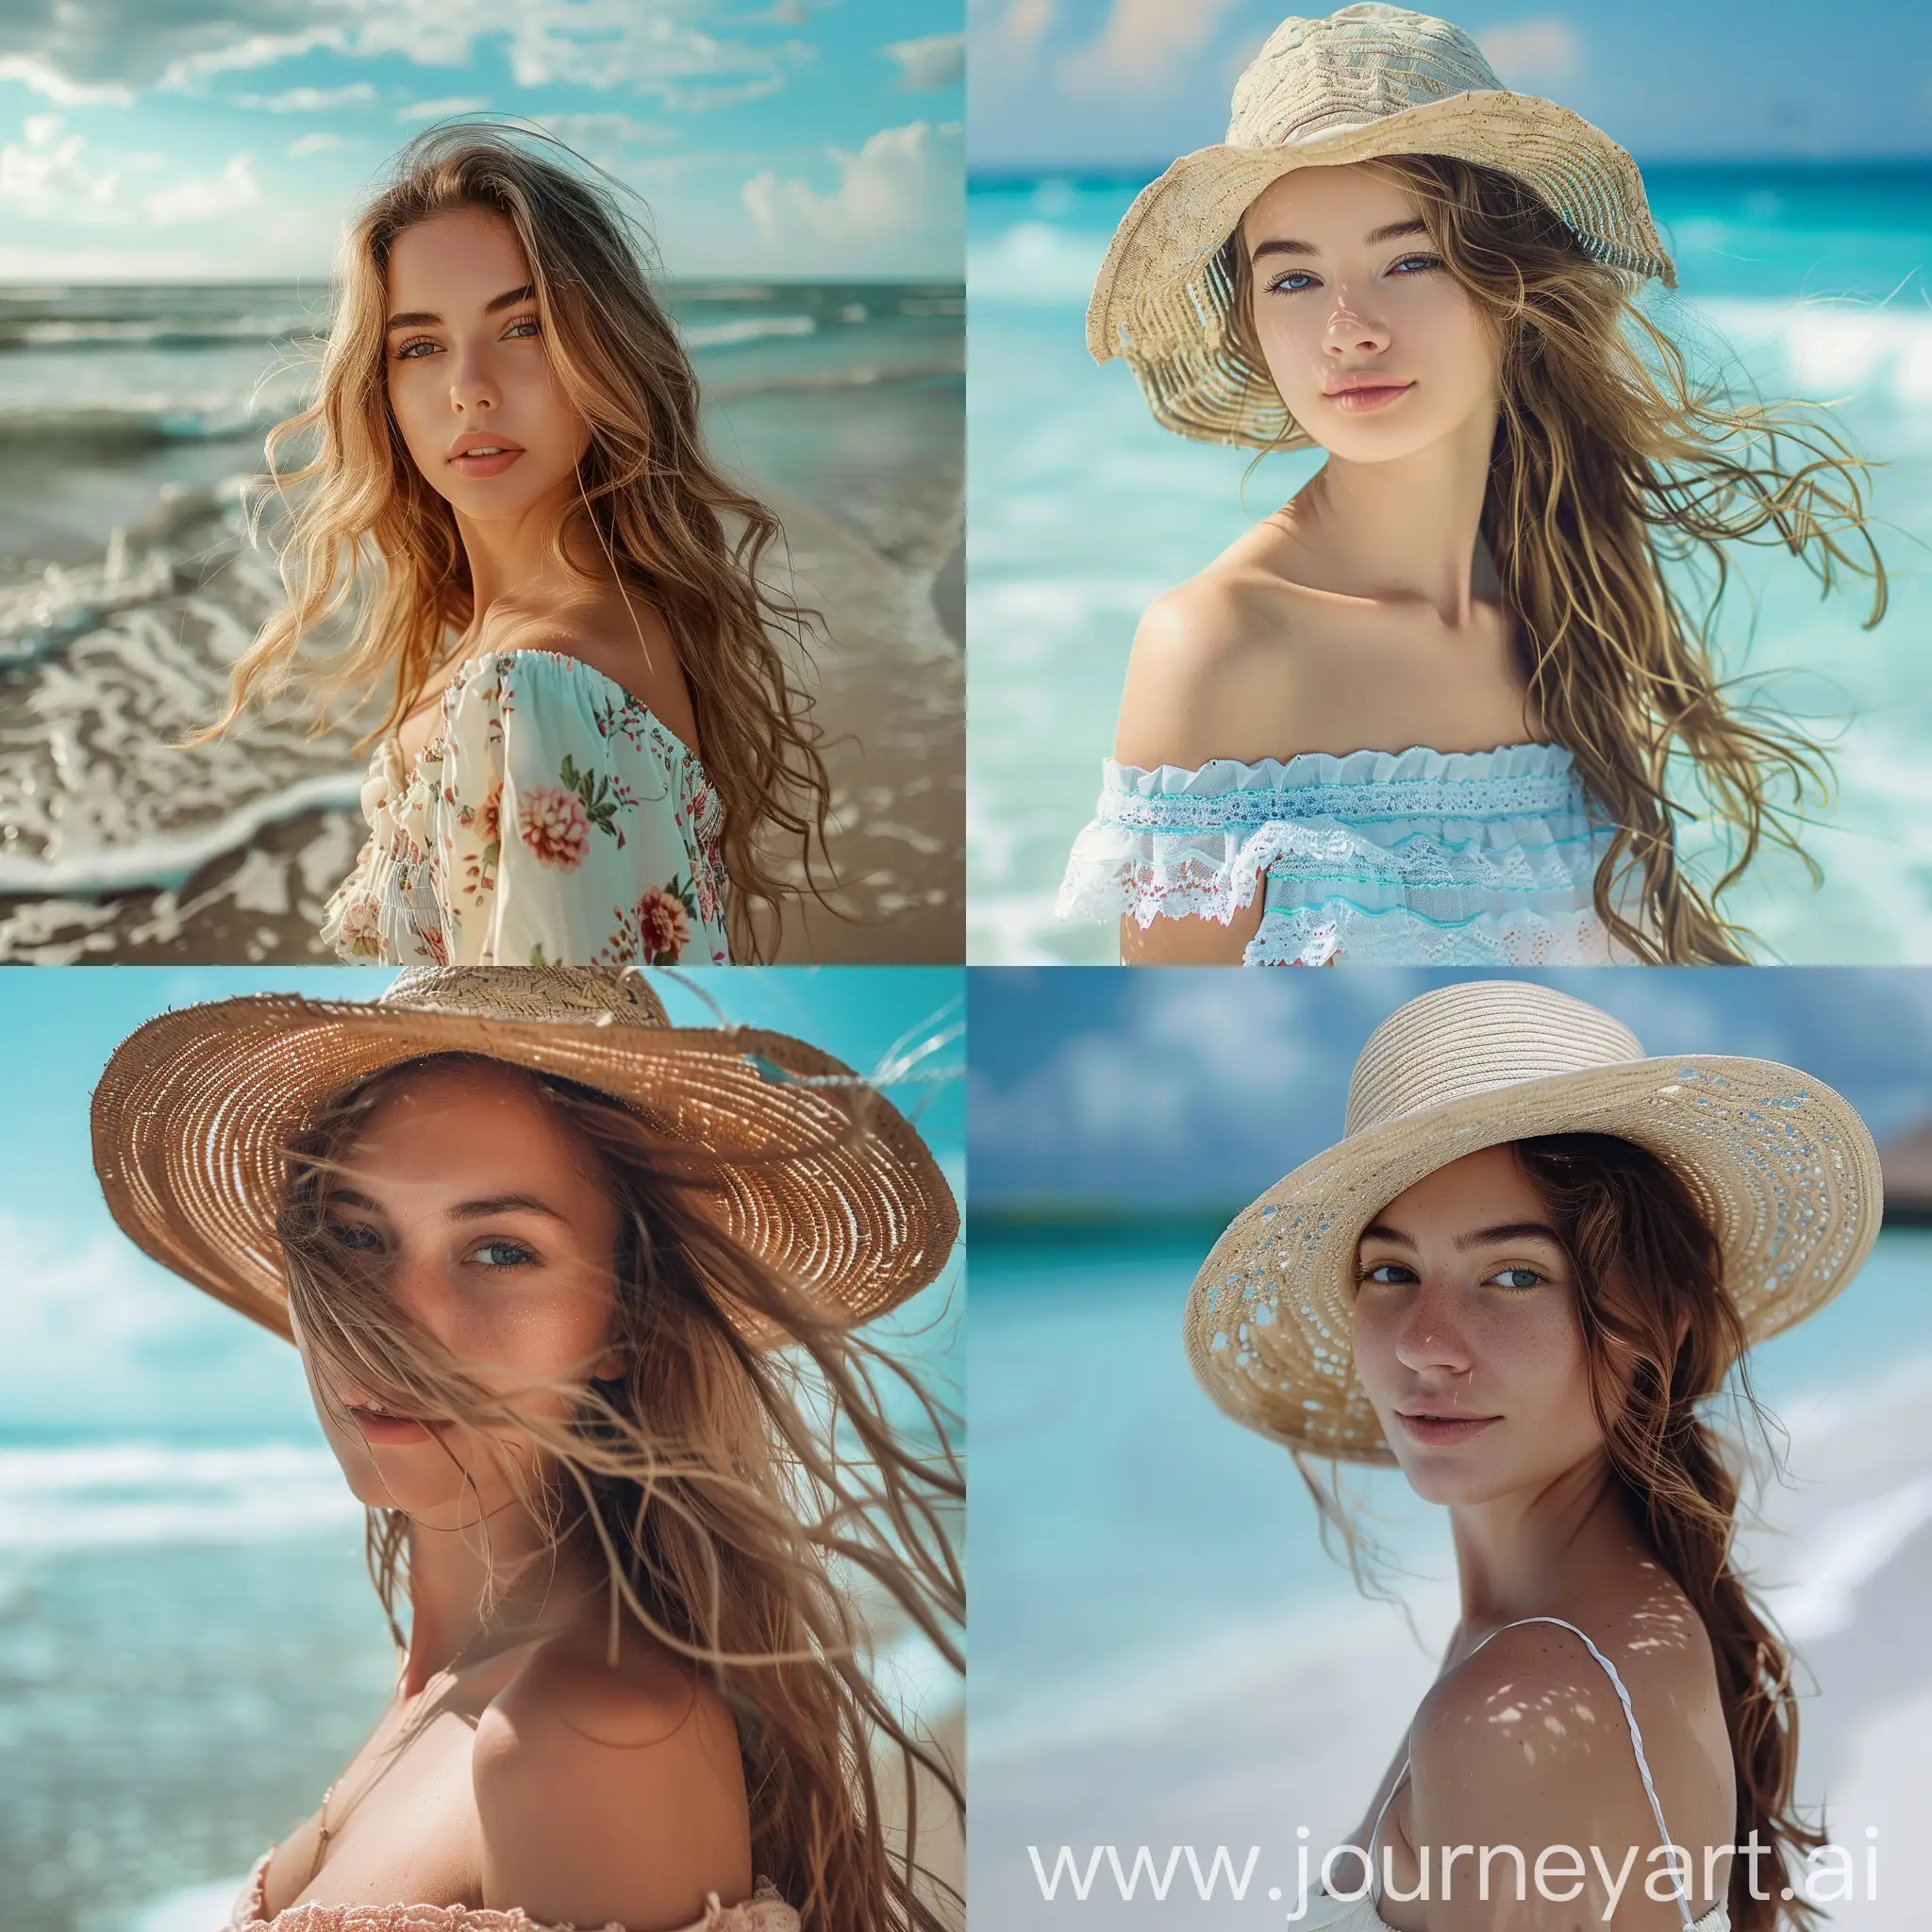 create the image of a beautiful girl at the beach